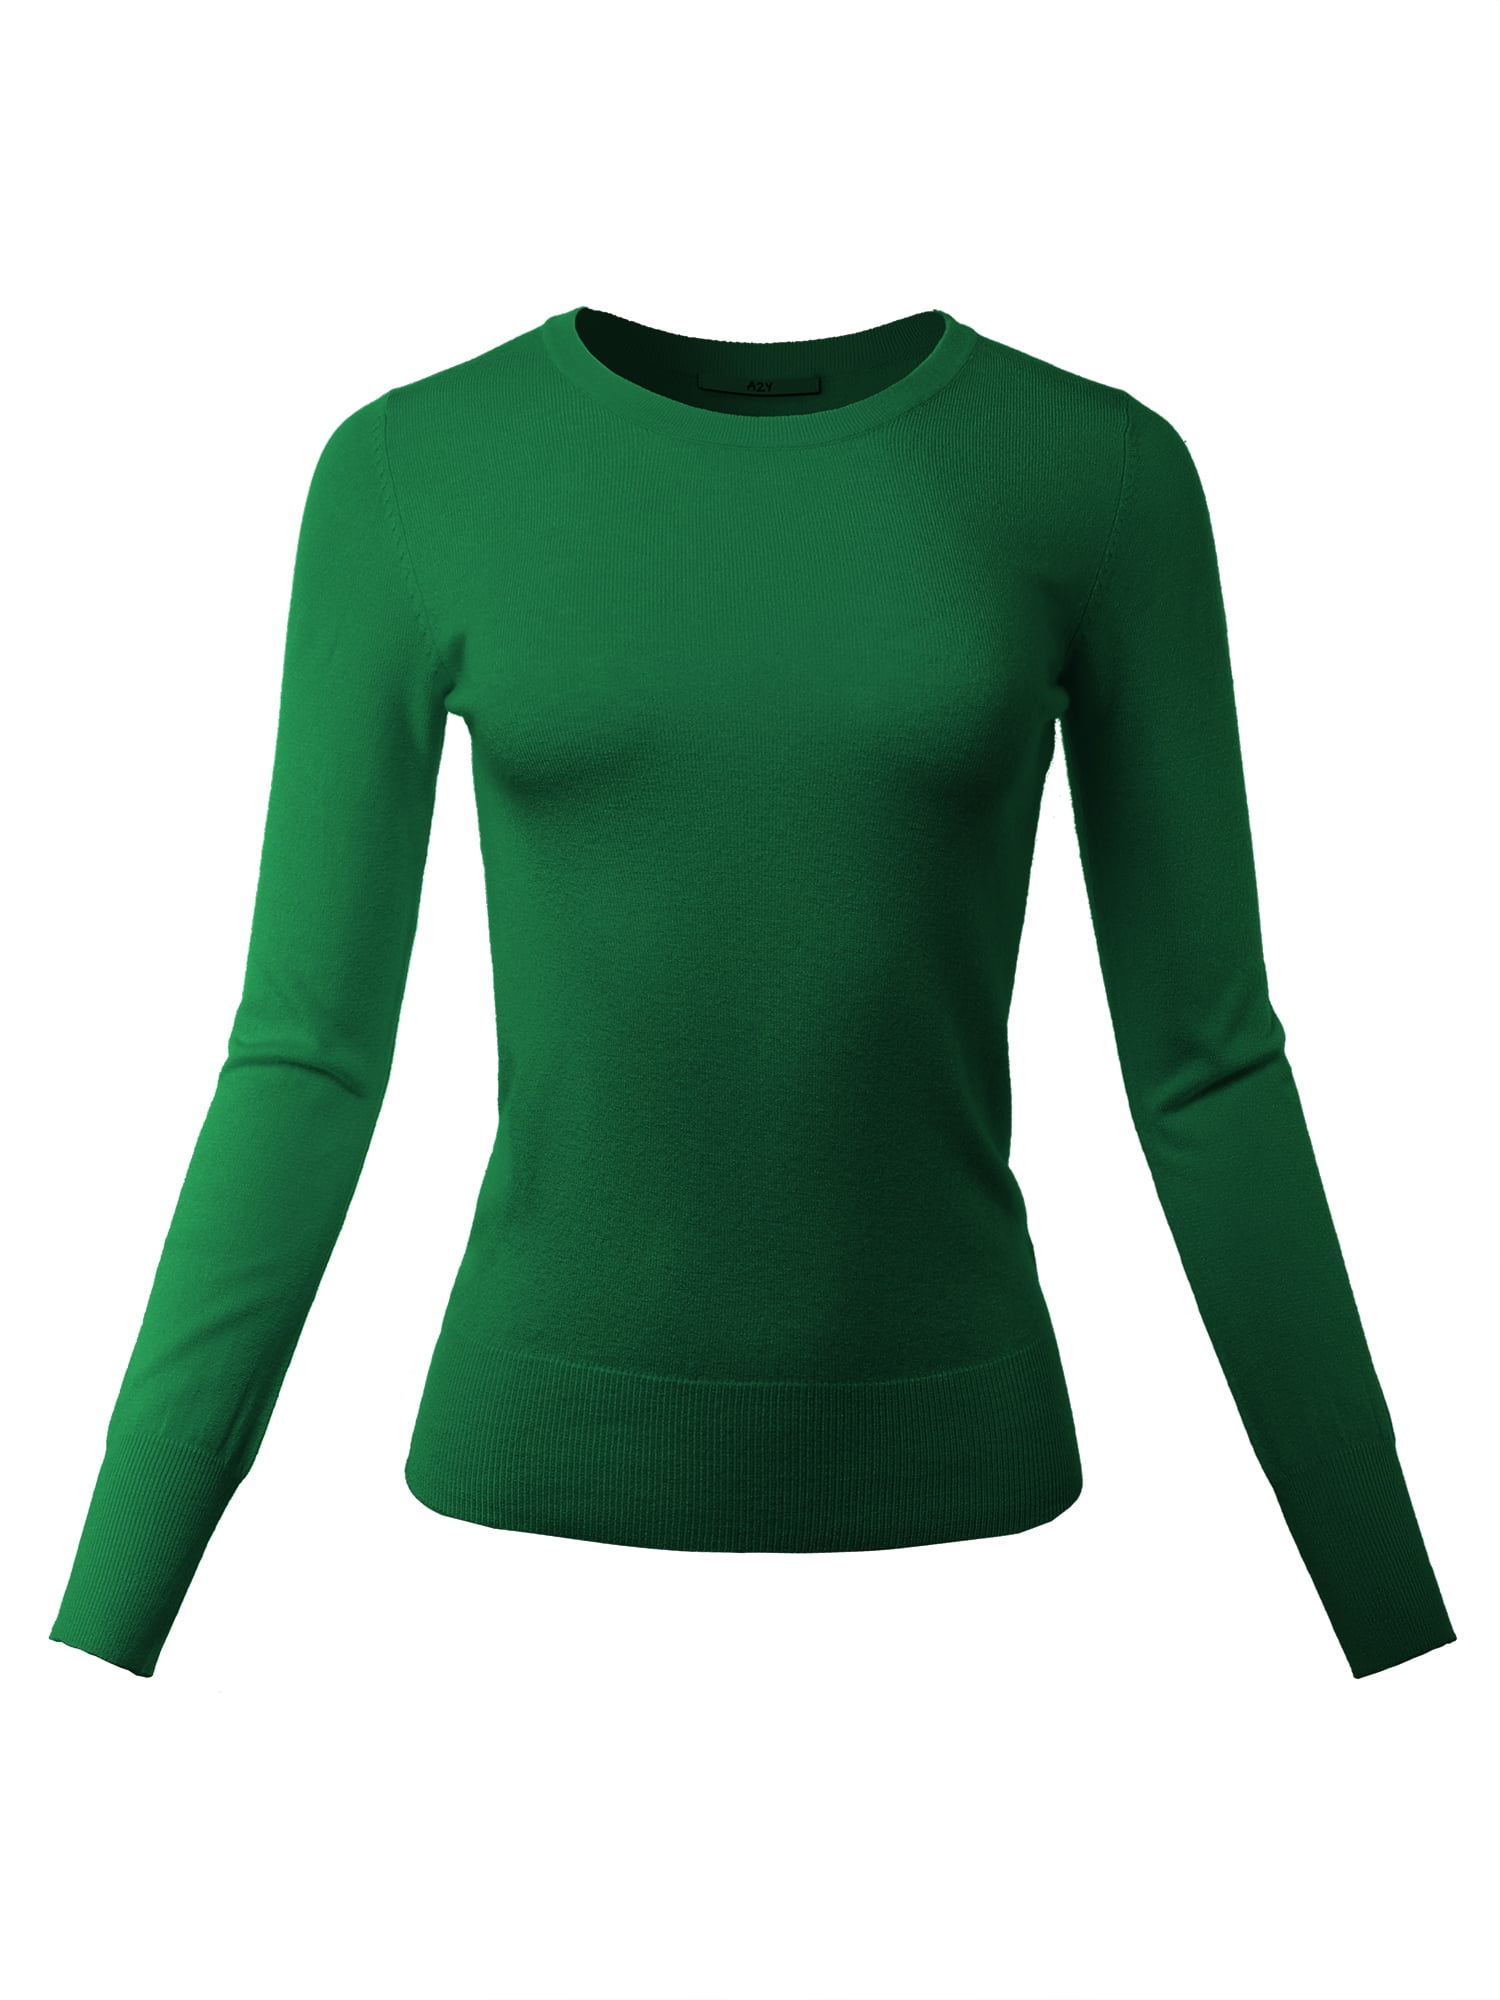 A2Y - A2Y Women's Fitted Crew Neck Long Sleeve Premium Pullover Viscose ...